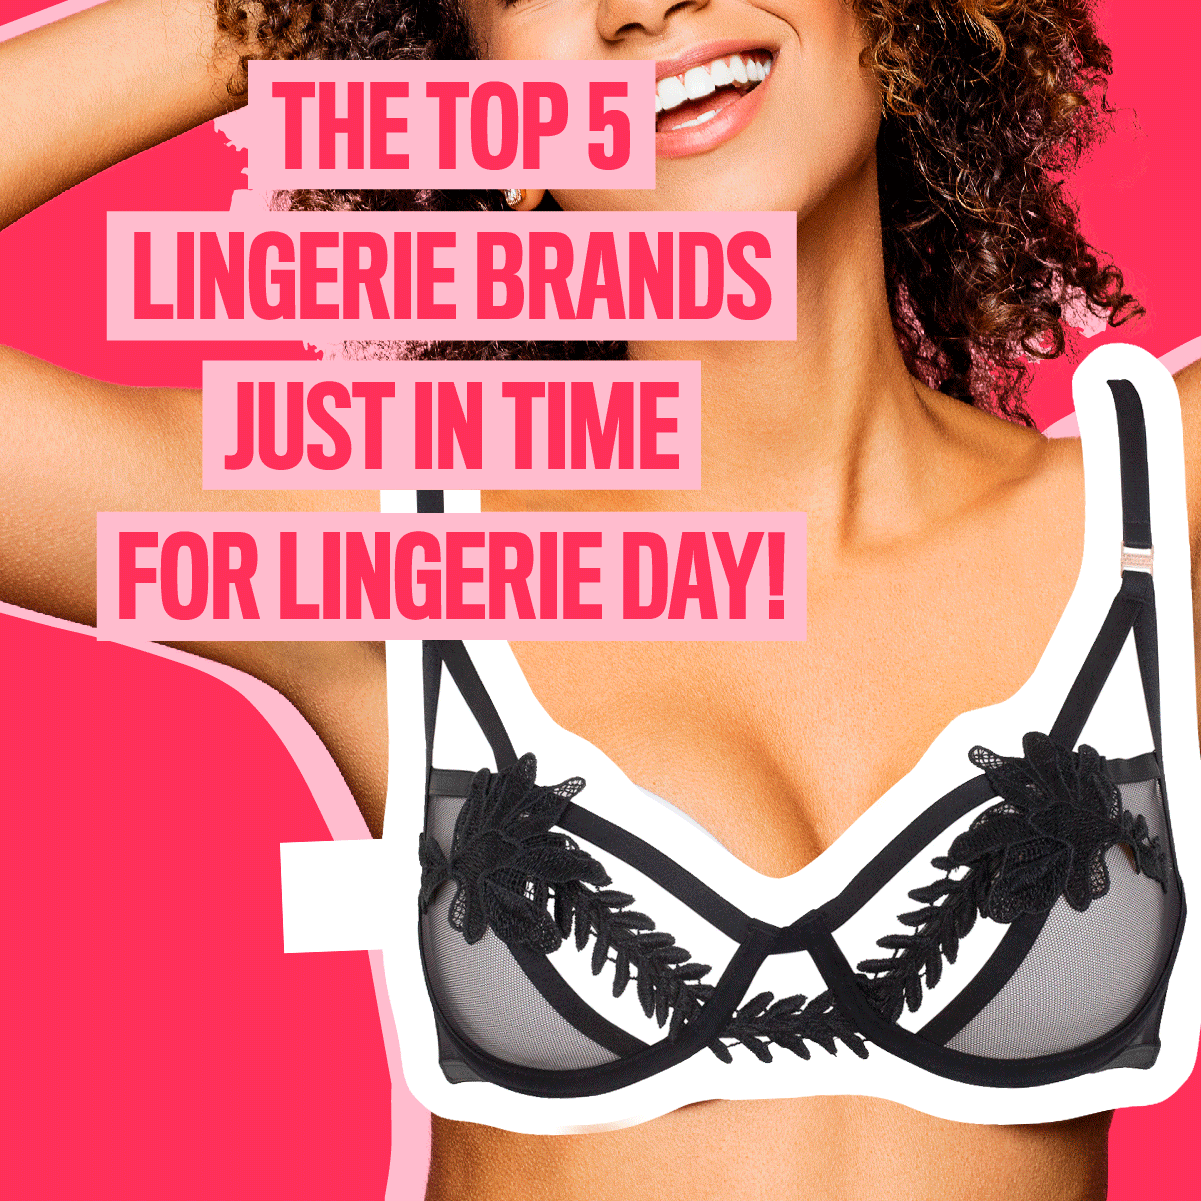 Get your paws ON my silky draws - The top 5 lingerie brands just in time for Lingerie Day!